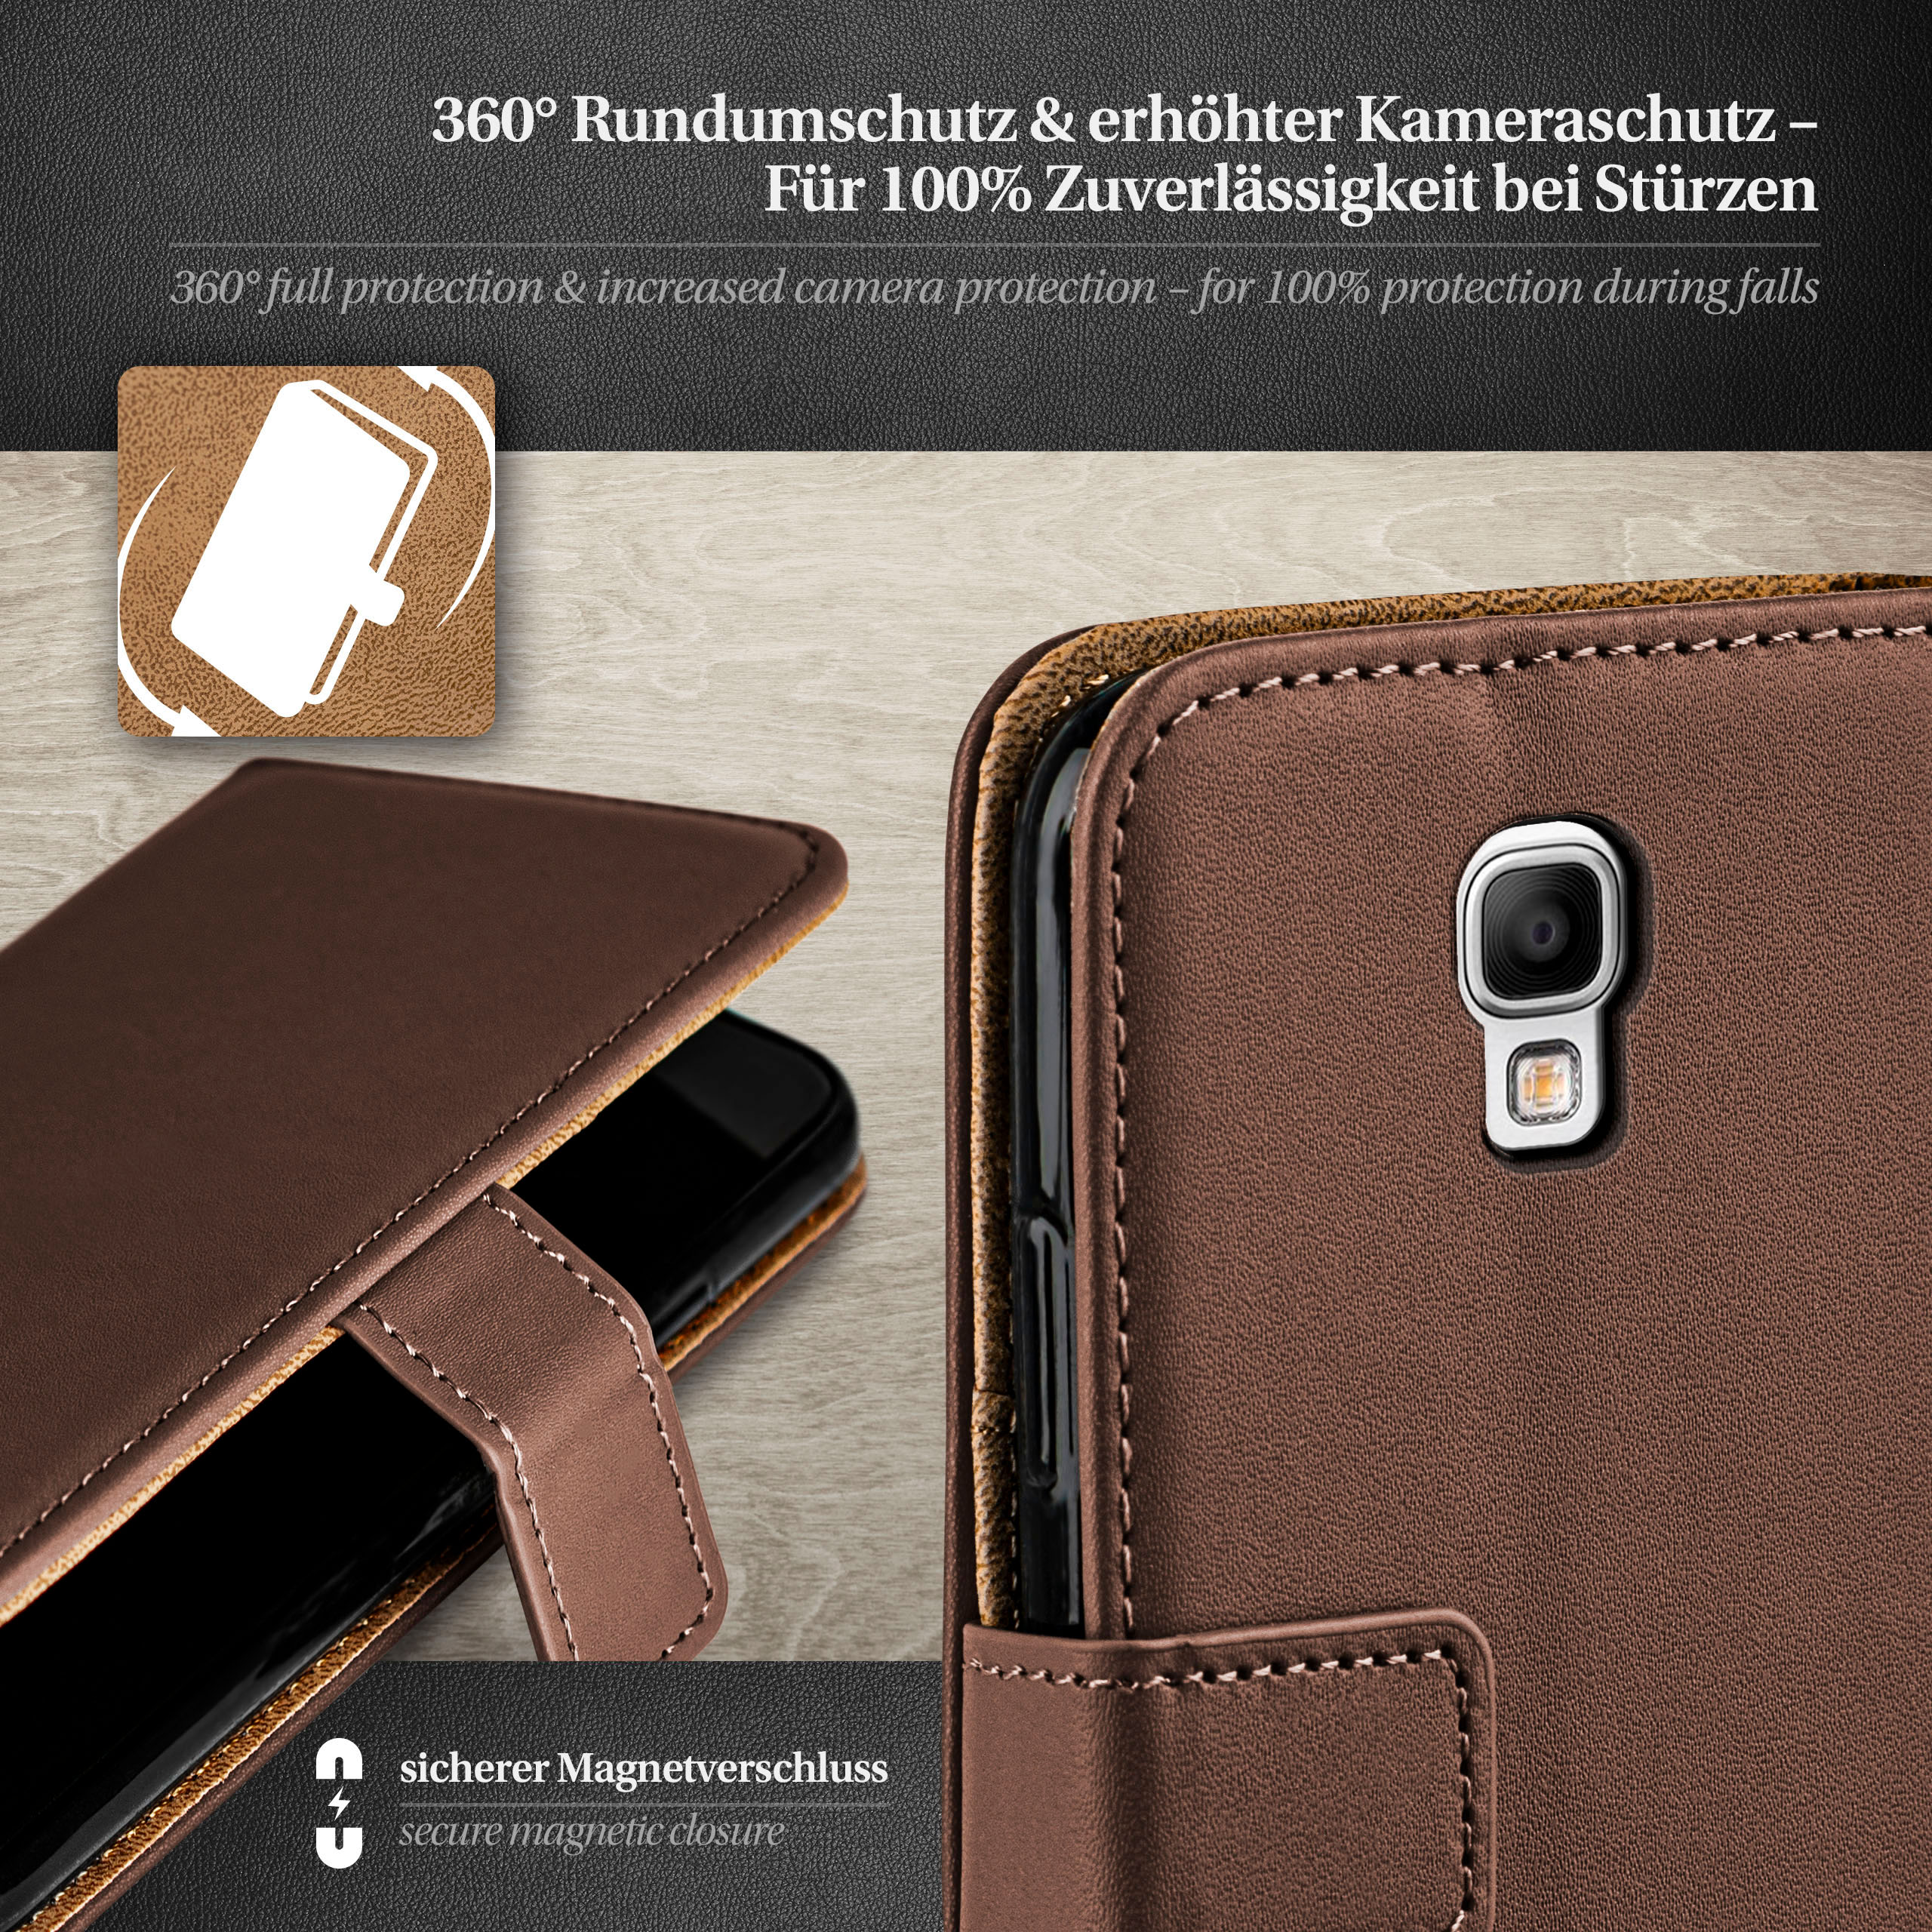 MOEX Book Case, Bookcover, Neo, Oxide-Brown Samsung, Note Galaxy 3